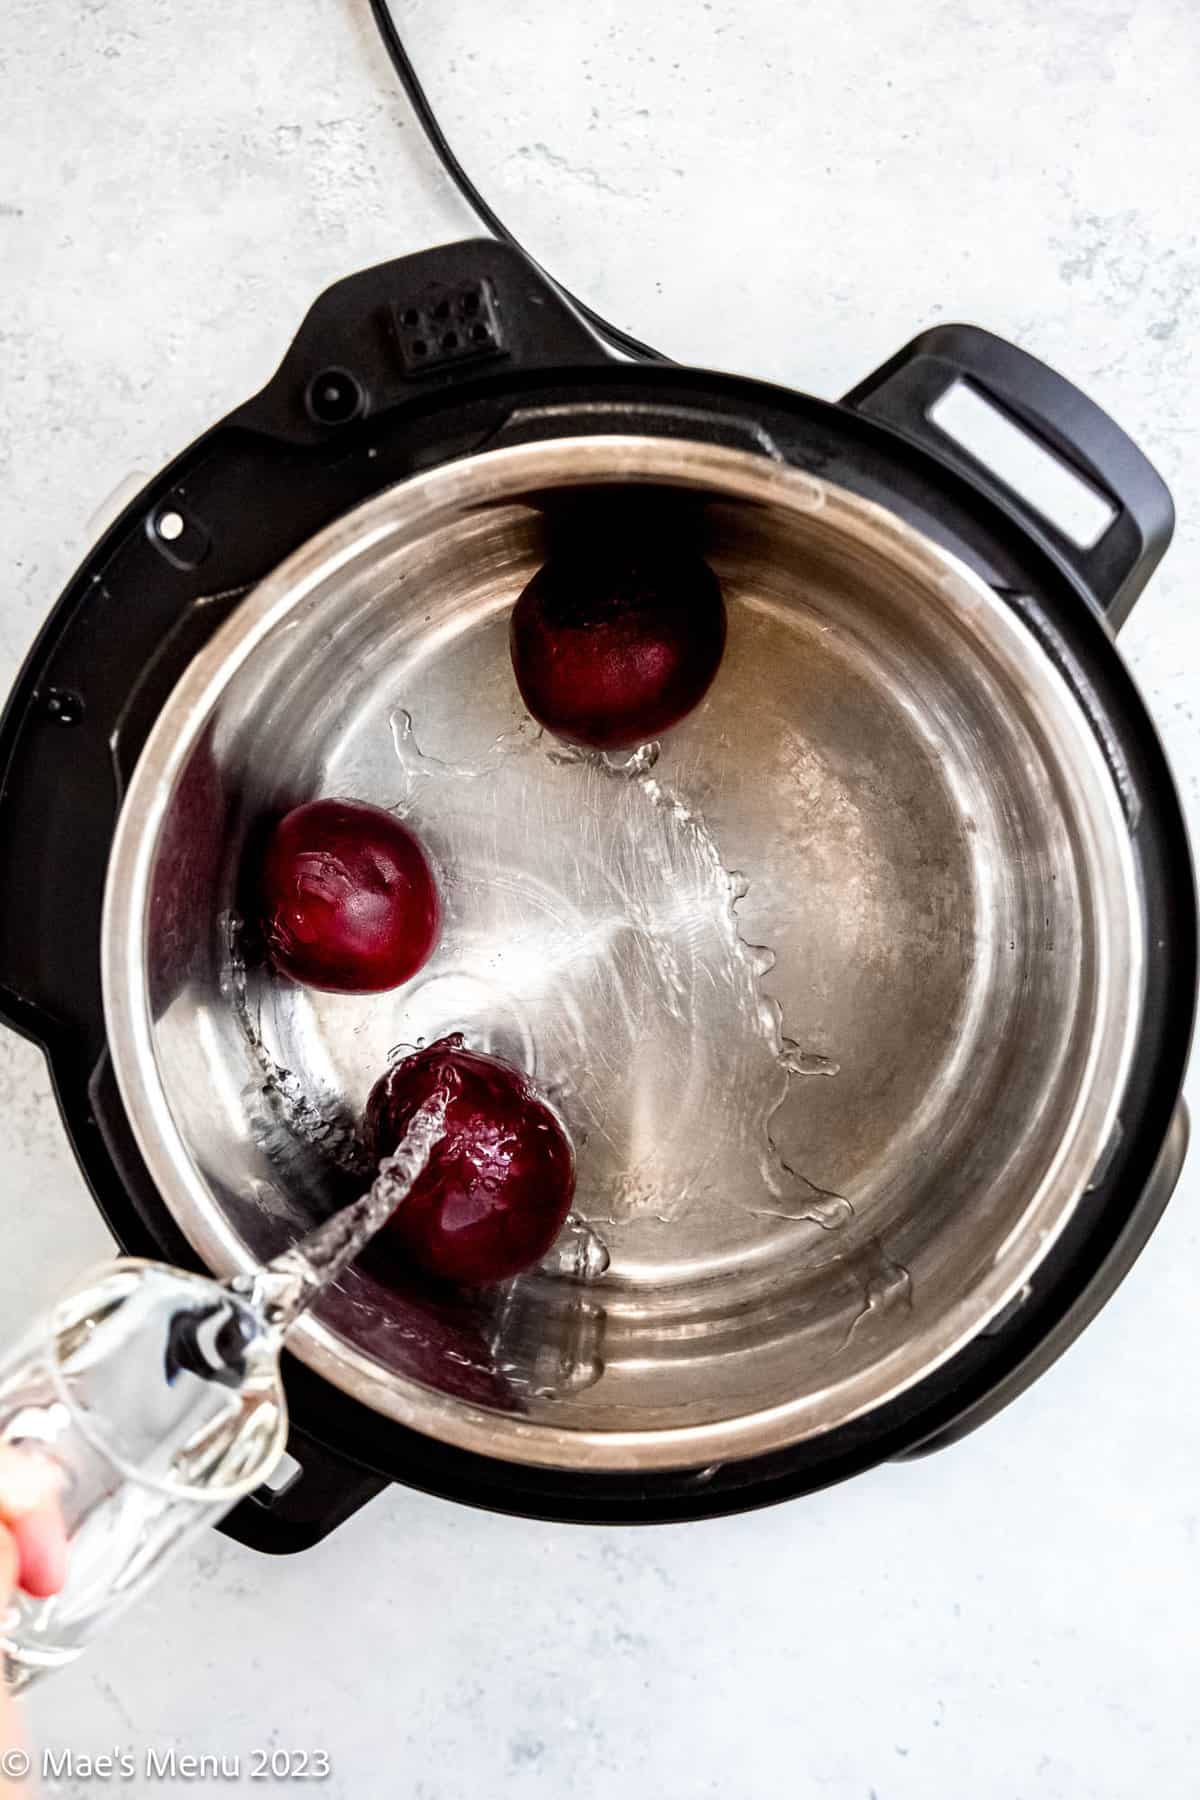 Pouring water into the instant pot with the beets.